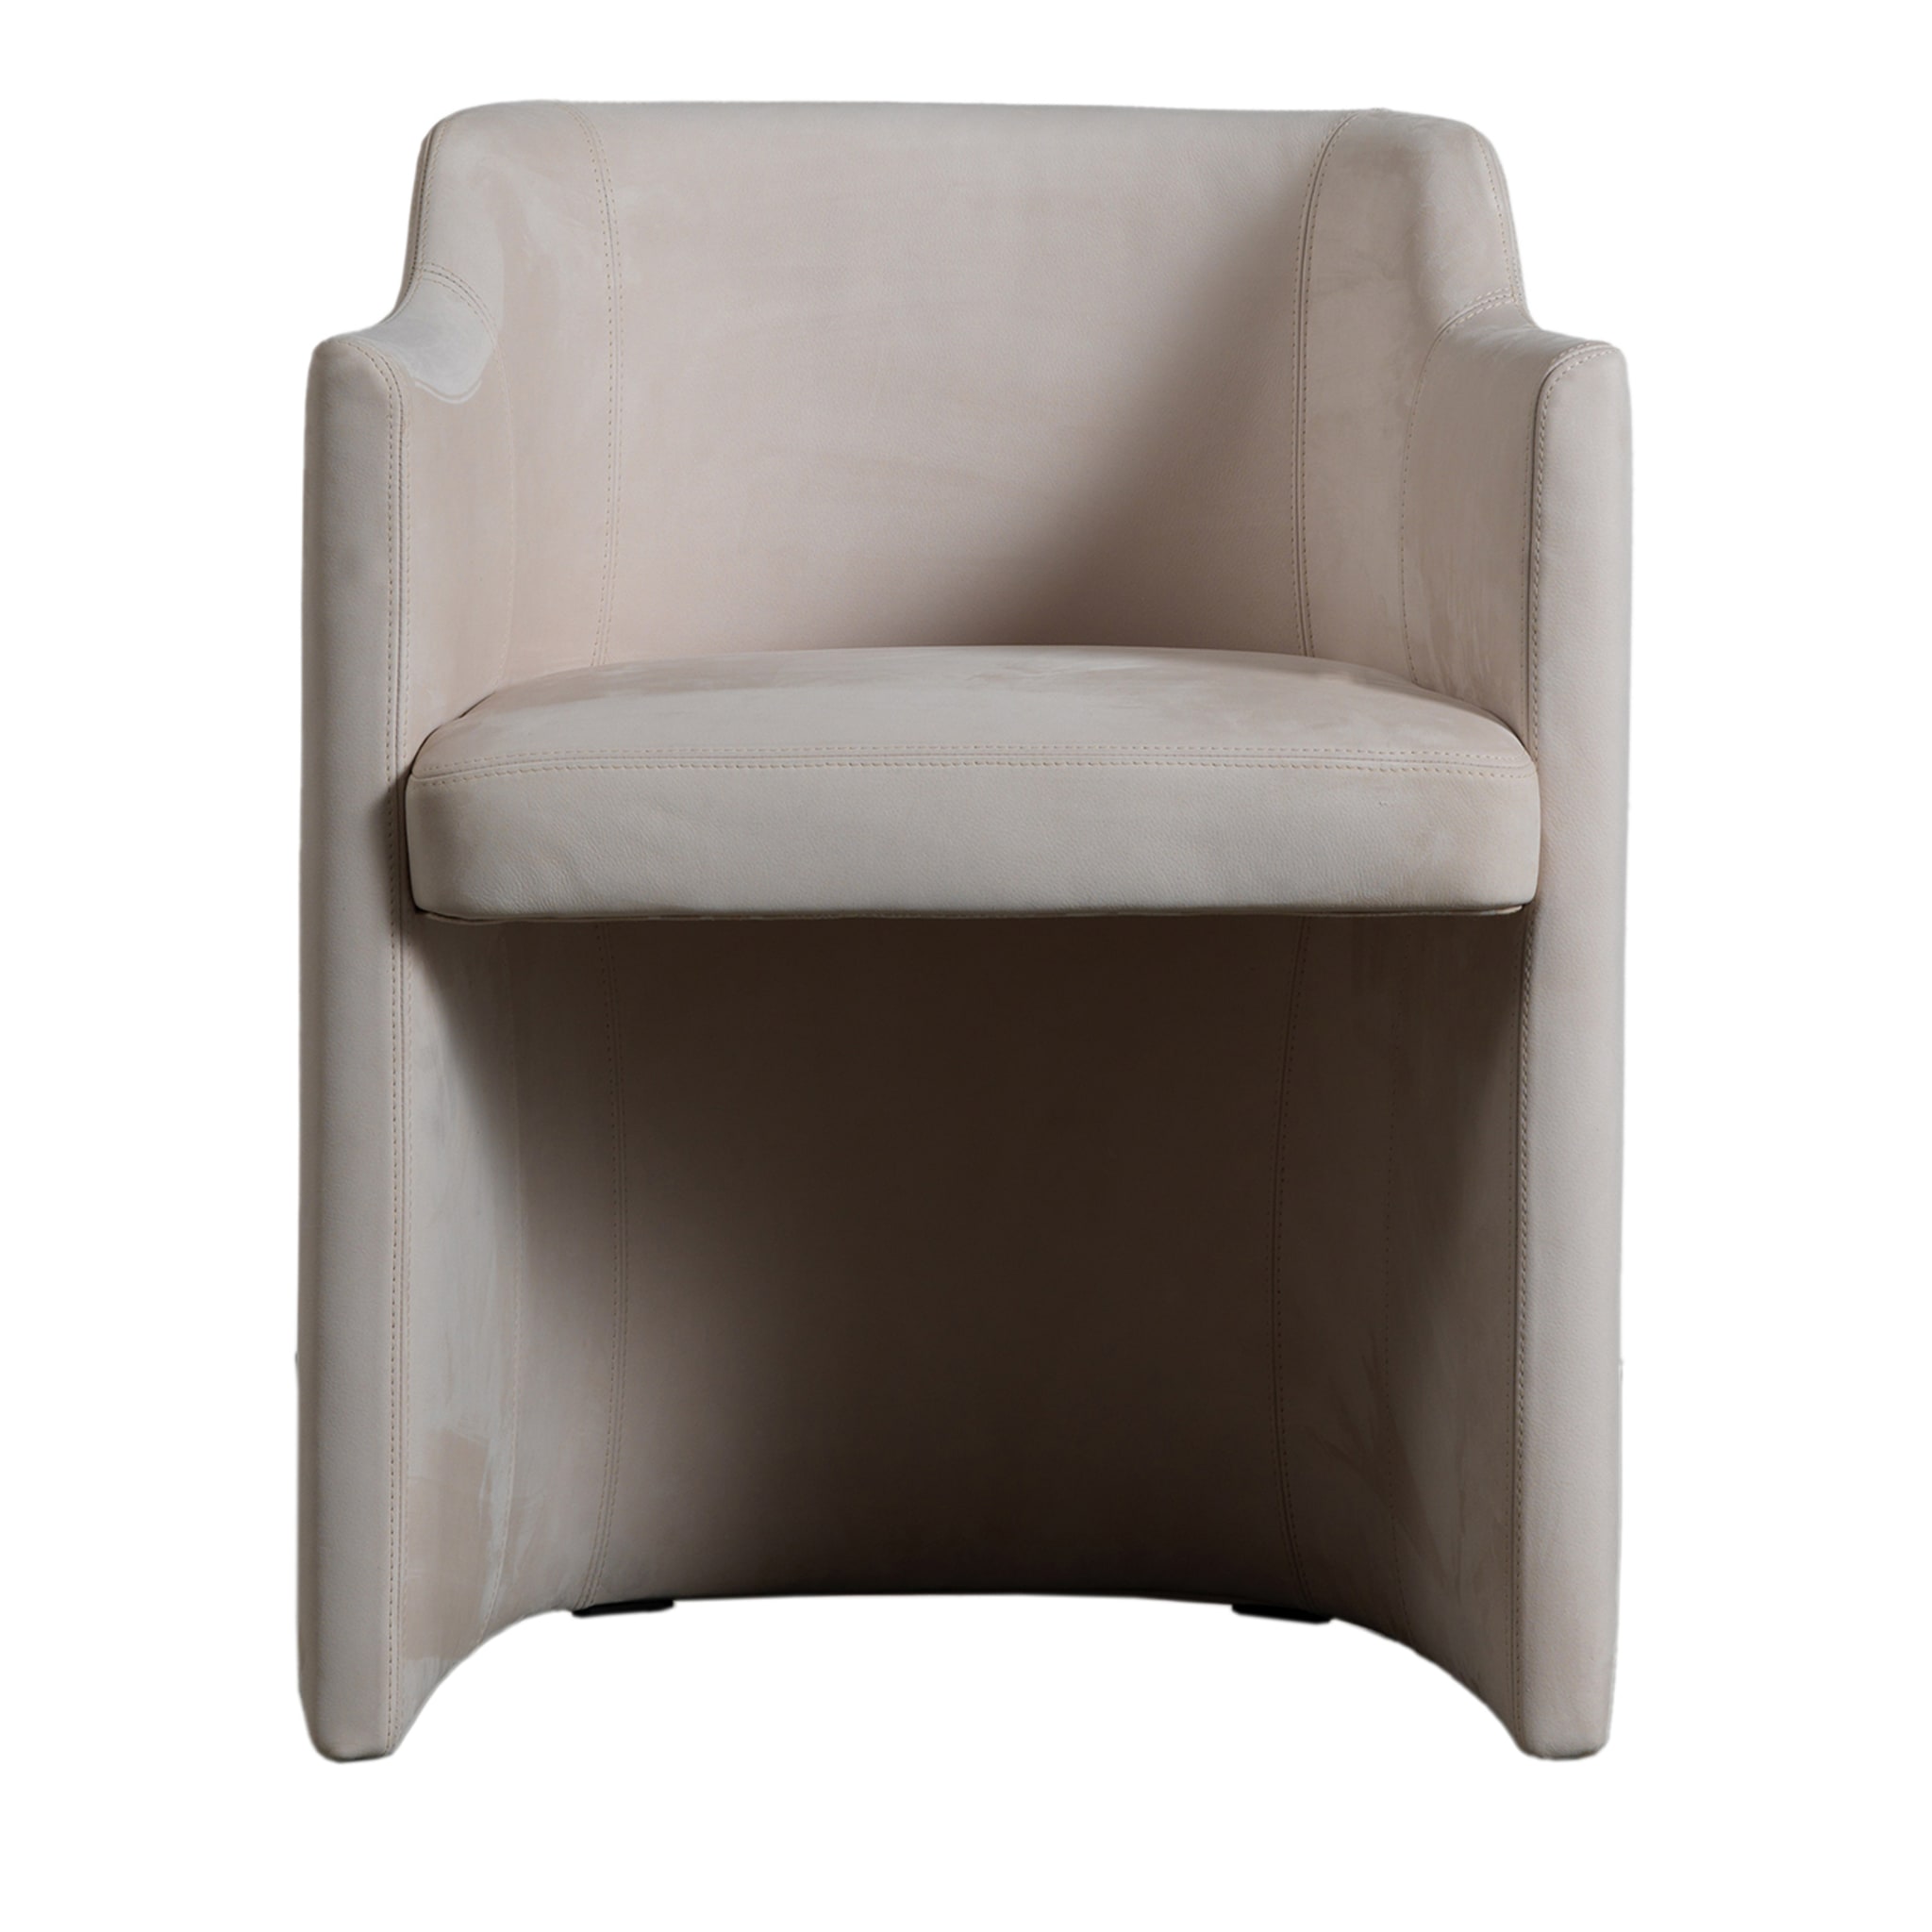 Charmant White Padded Armchair - Main view